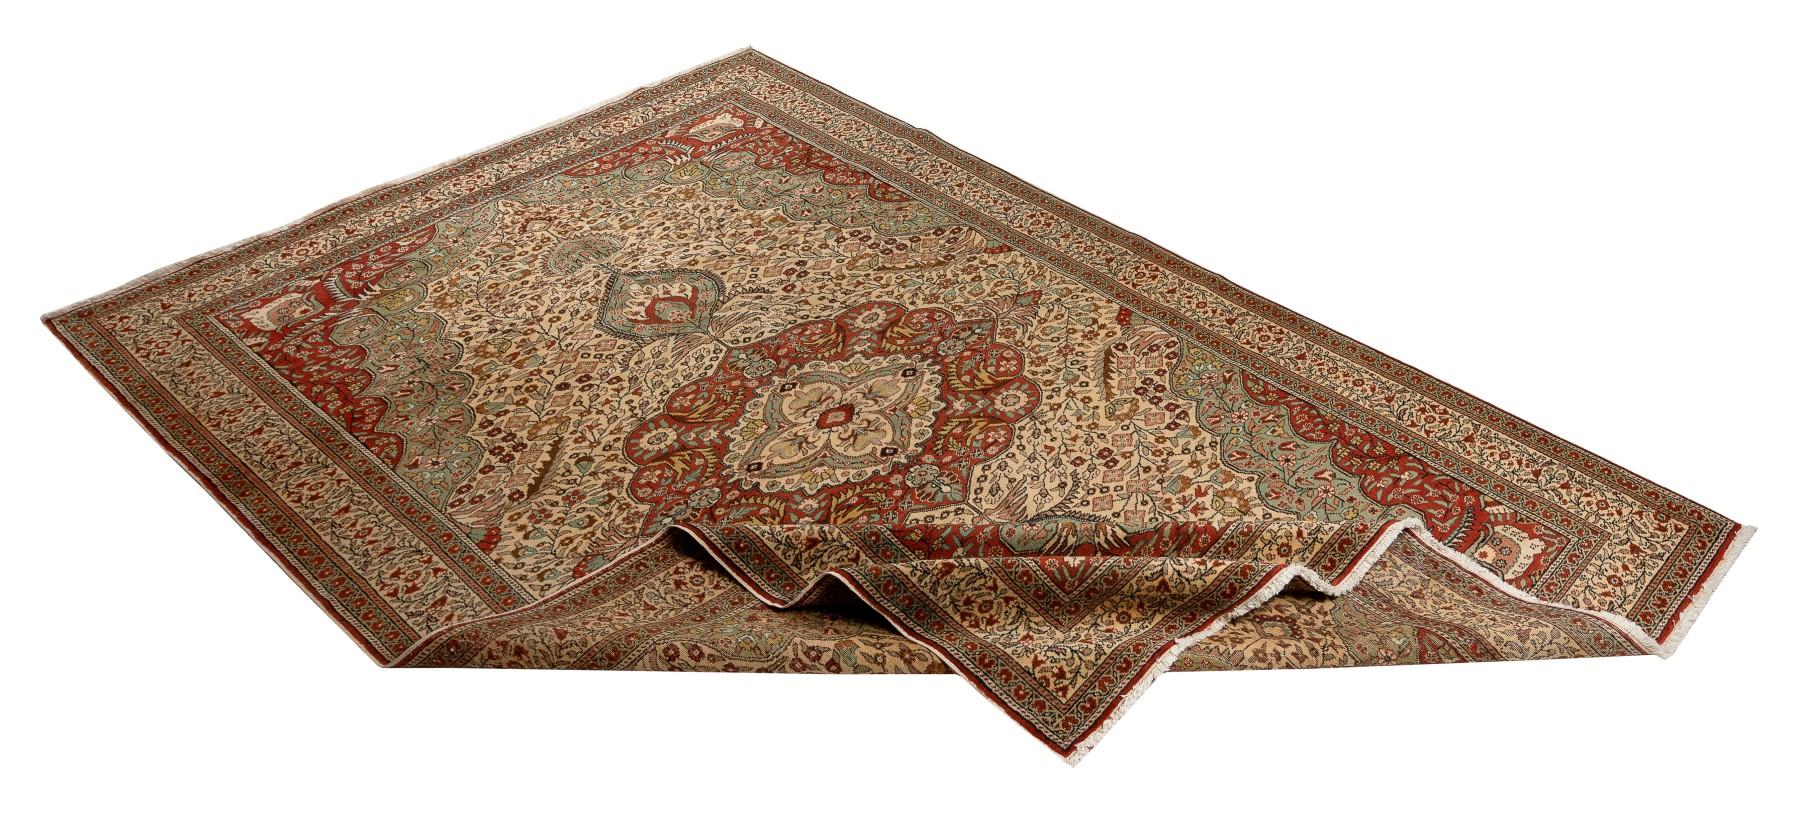 A highly decorative vintage Kayseri rug made in the 1970s, from the town of Kayseri in Central Turkey, that had long been a famous centre of rug-making. This finely hand-knotted rug features all the classical elements of its kind: Extreme attention